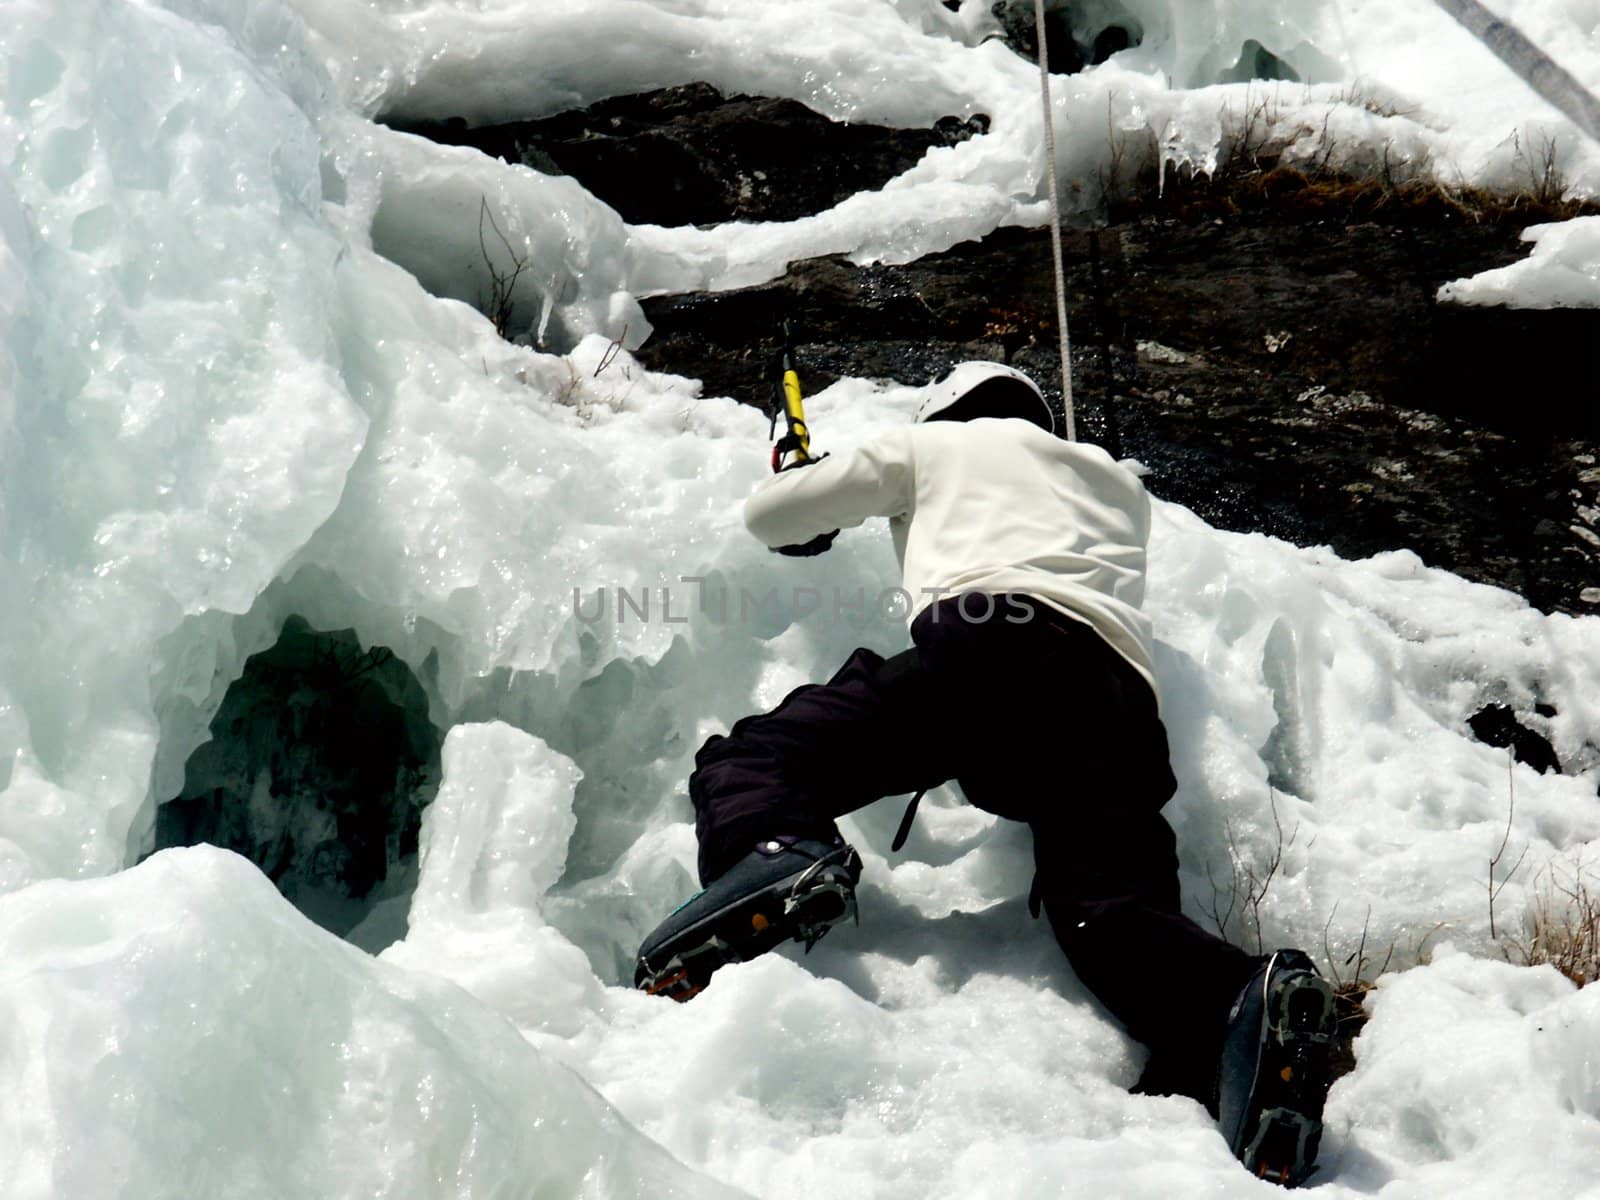 A man climbs up a frozen waterfall using ice axes (tools) and crampons, on a top-rope belay system.